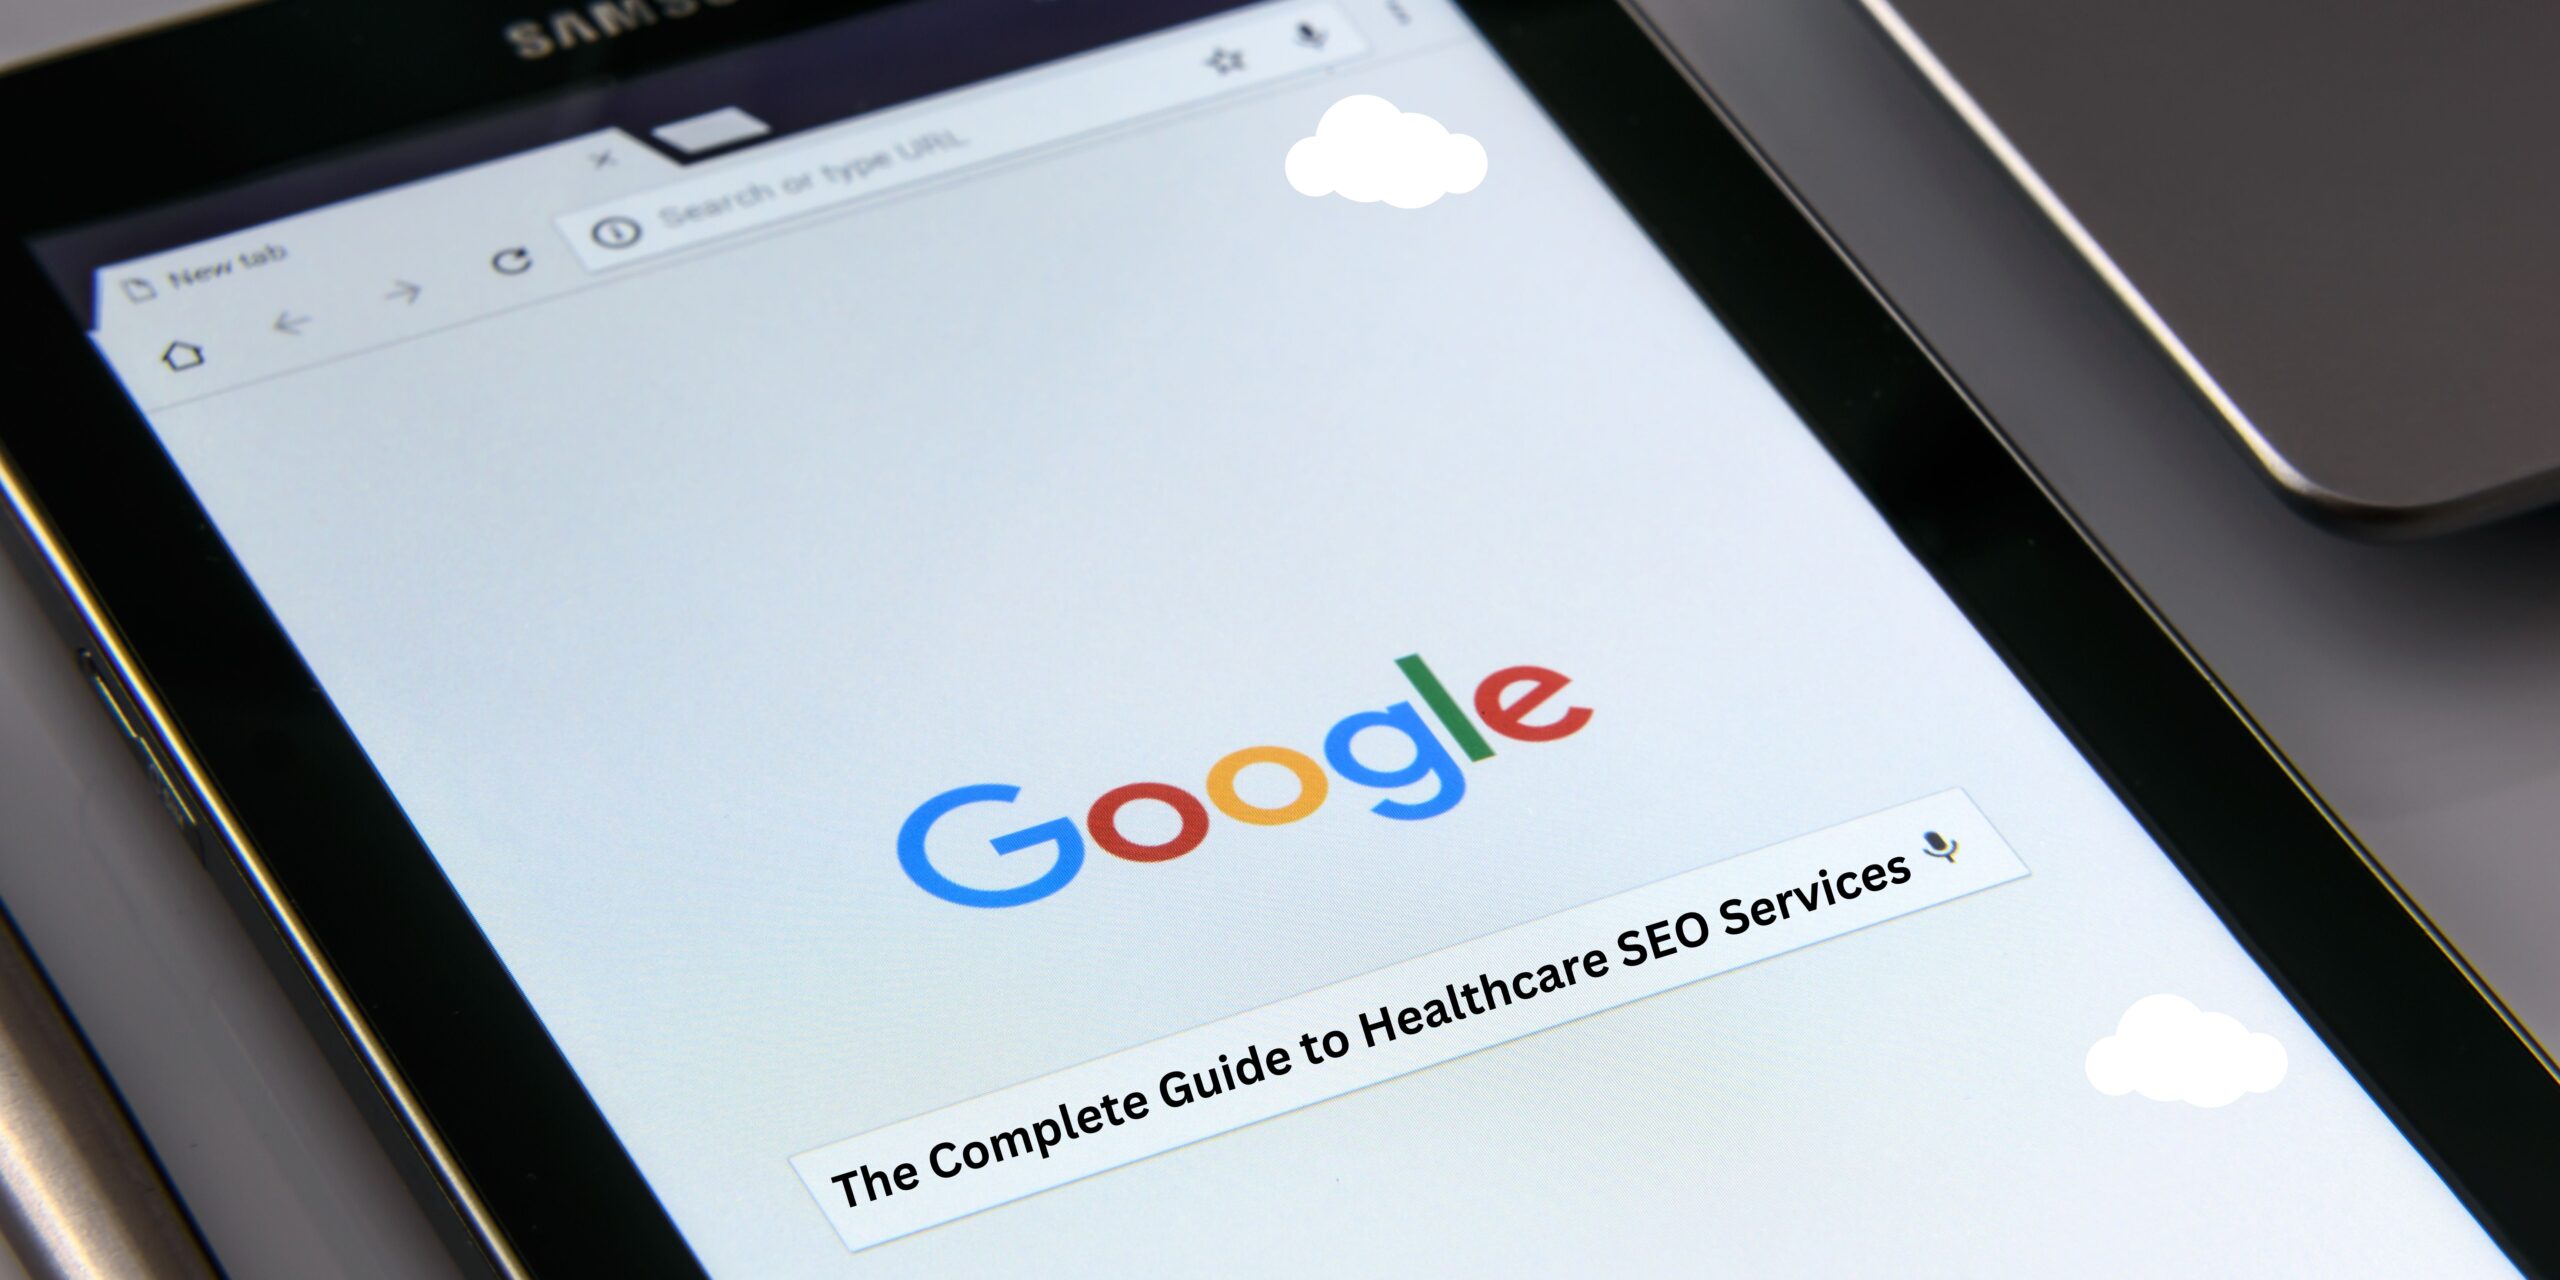 The Complete Guide to Healthcare SEO Services